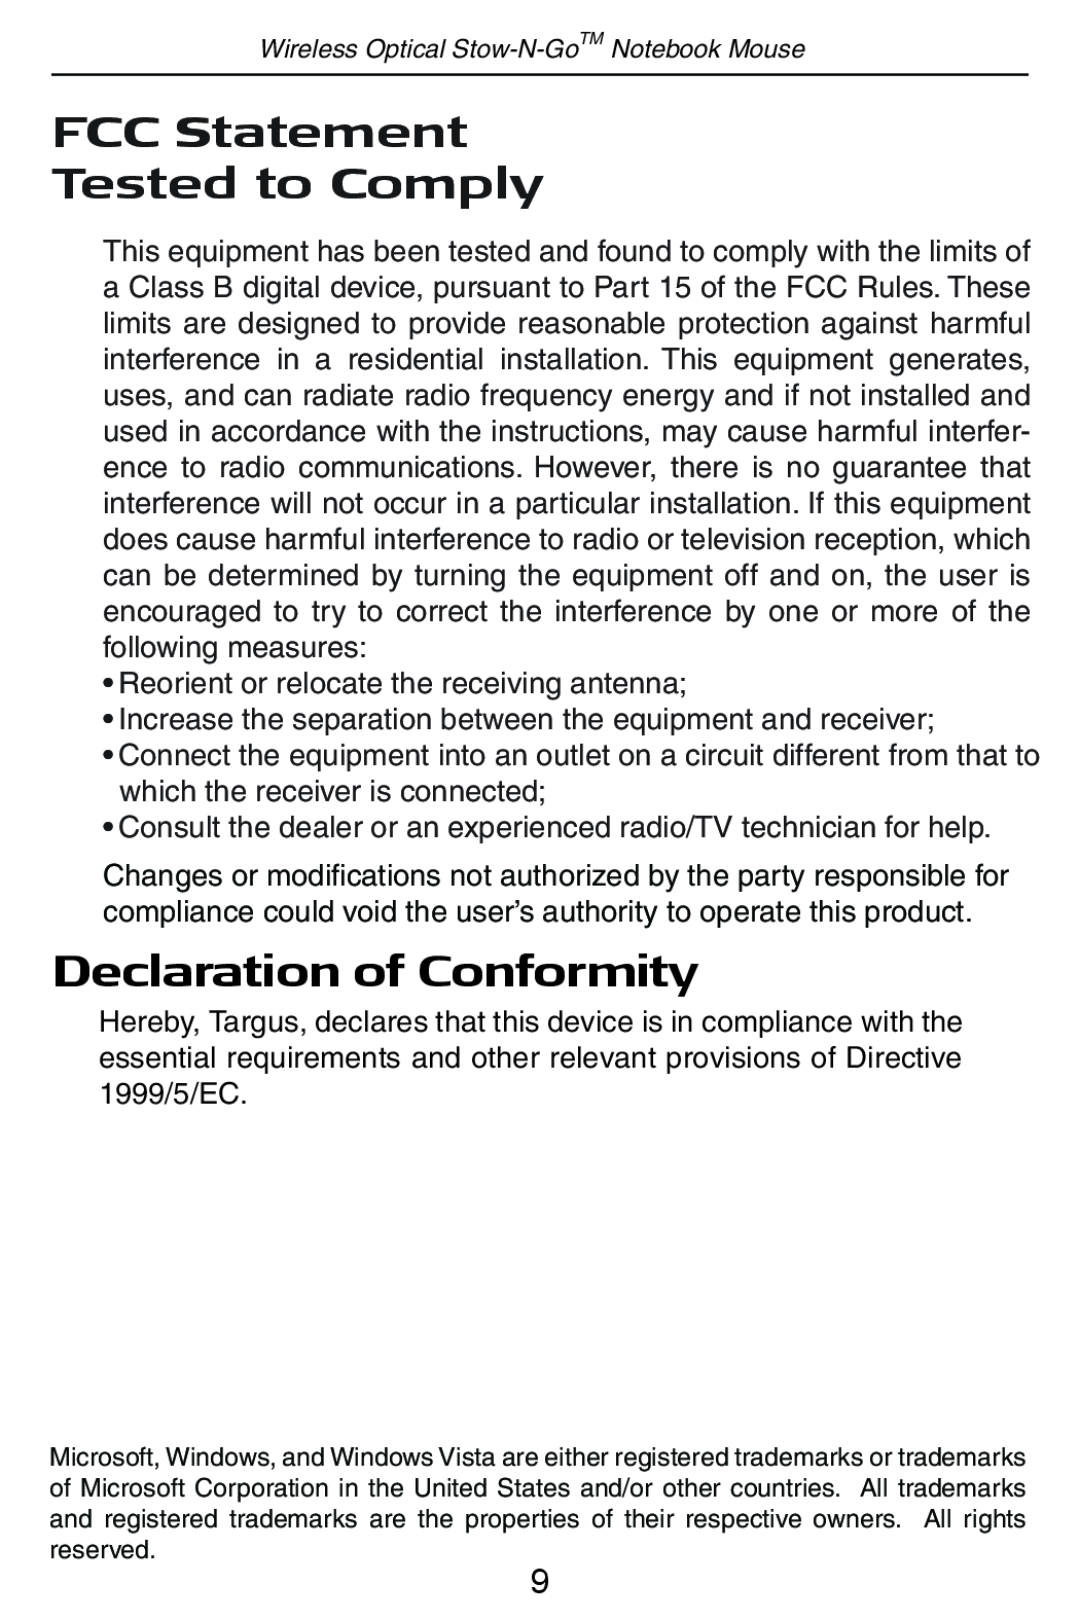 Targus Wireless Optical Stow-N-GoTM Notebook Mouse 30 FCC Statement Tested to Comply, Declaration of Conformity 